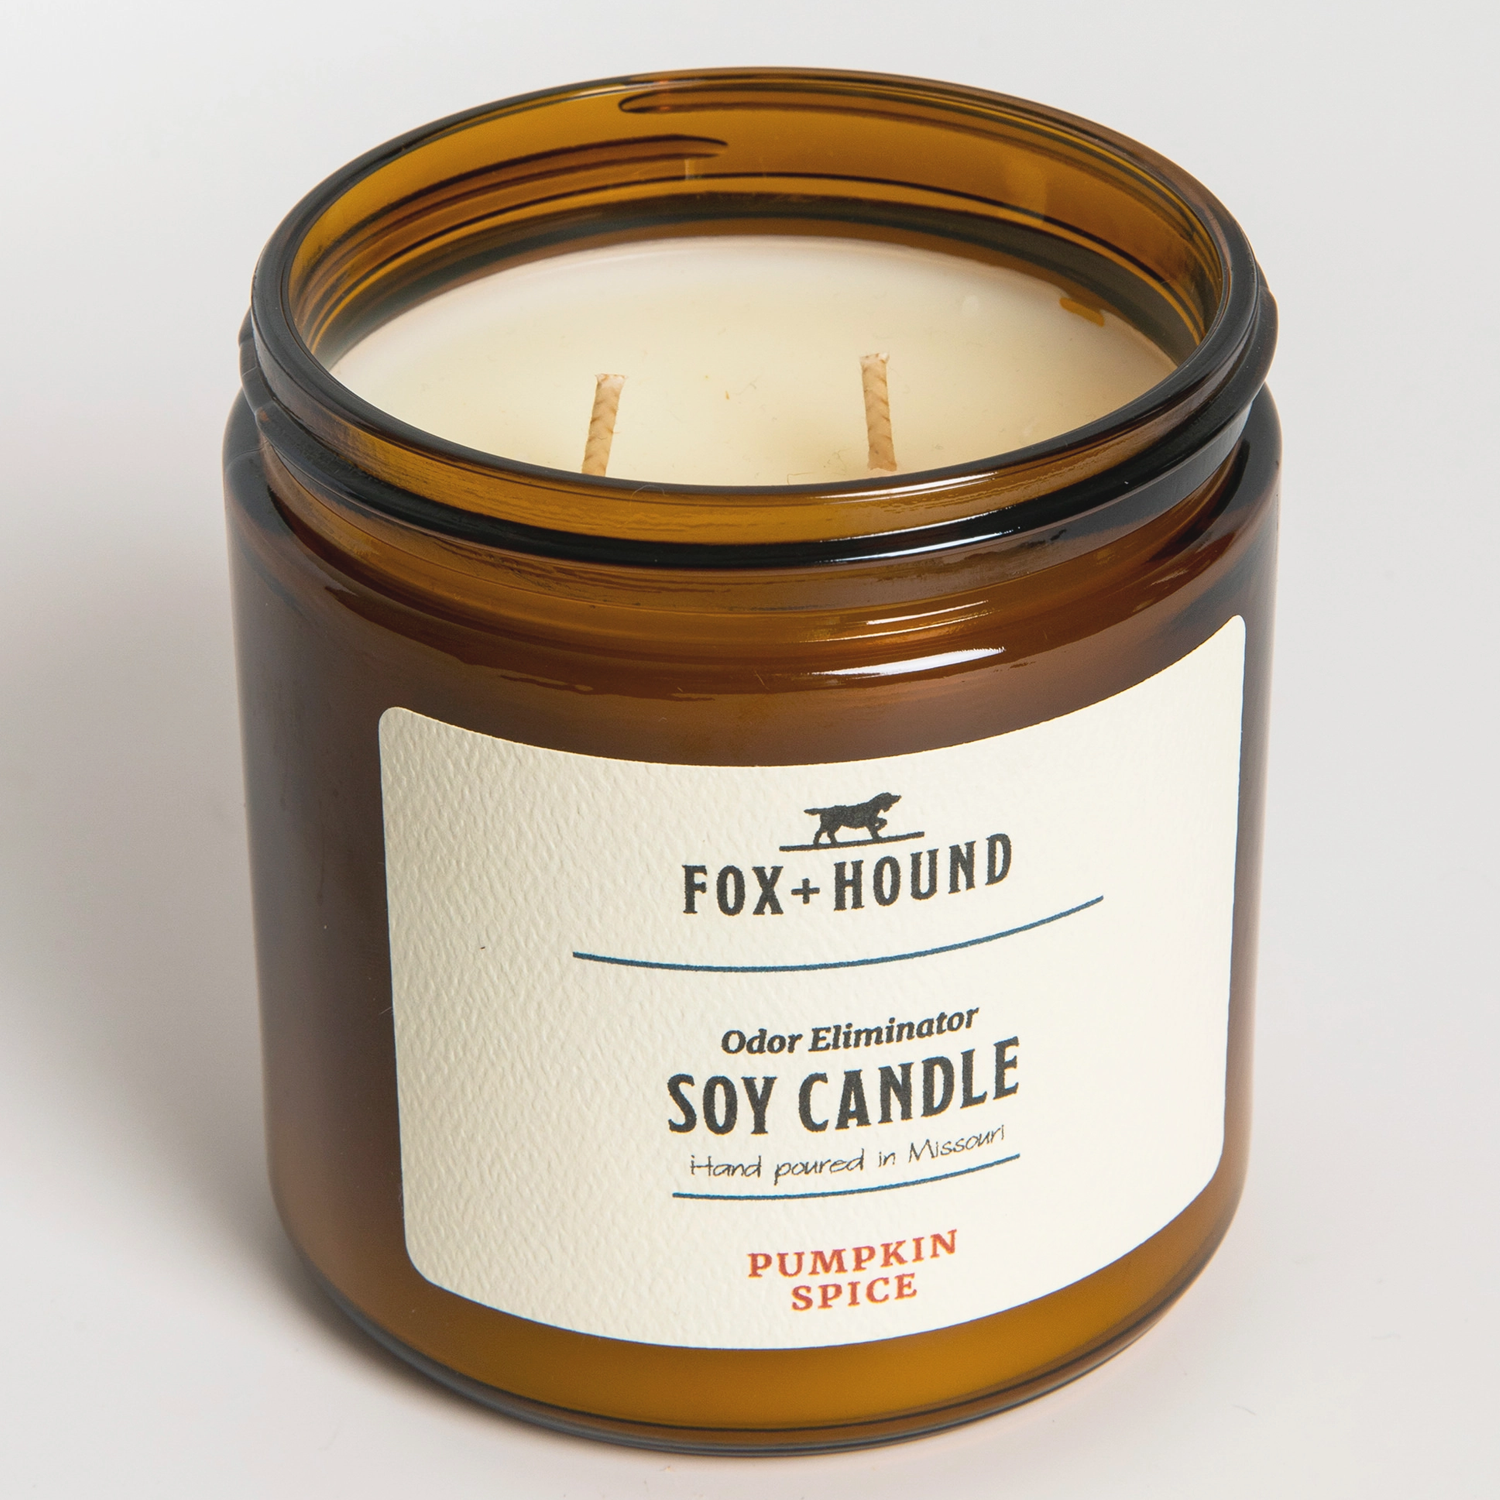 Pet Boutique - Dog Grooming - Bath and Body - Odor Eliminator Soy Candle: Pumpkin Spice by Fox + Hound